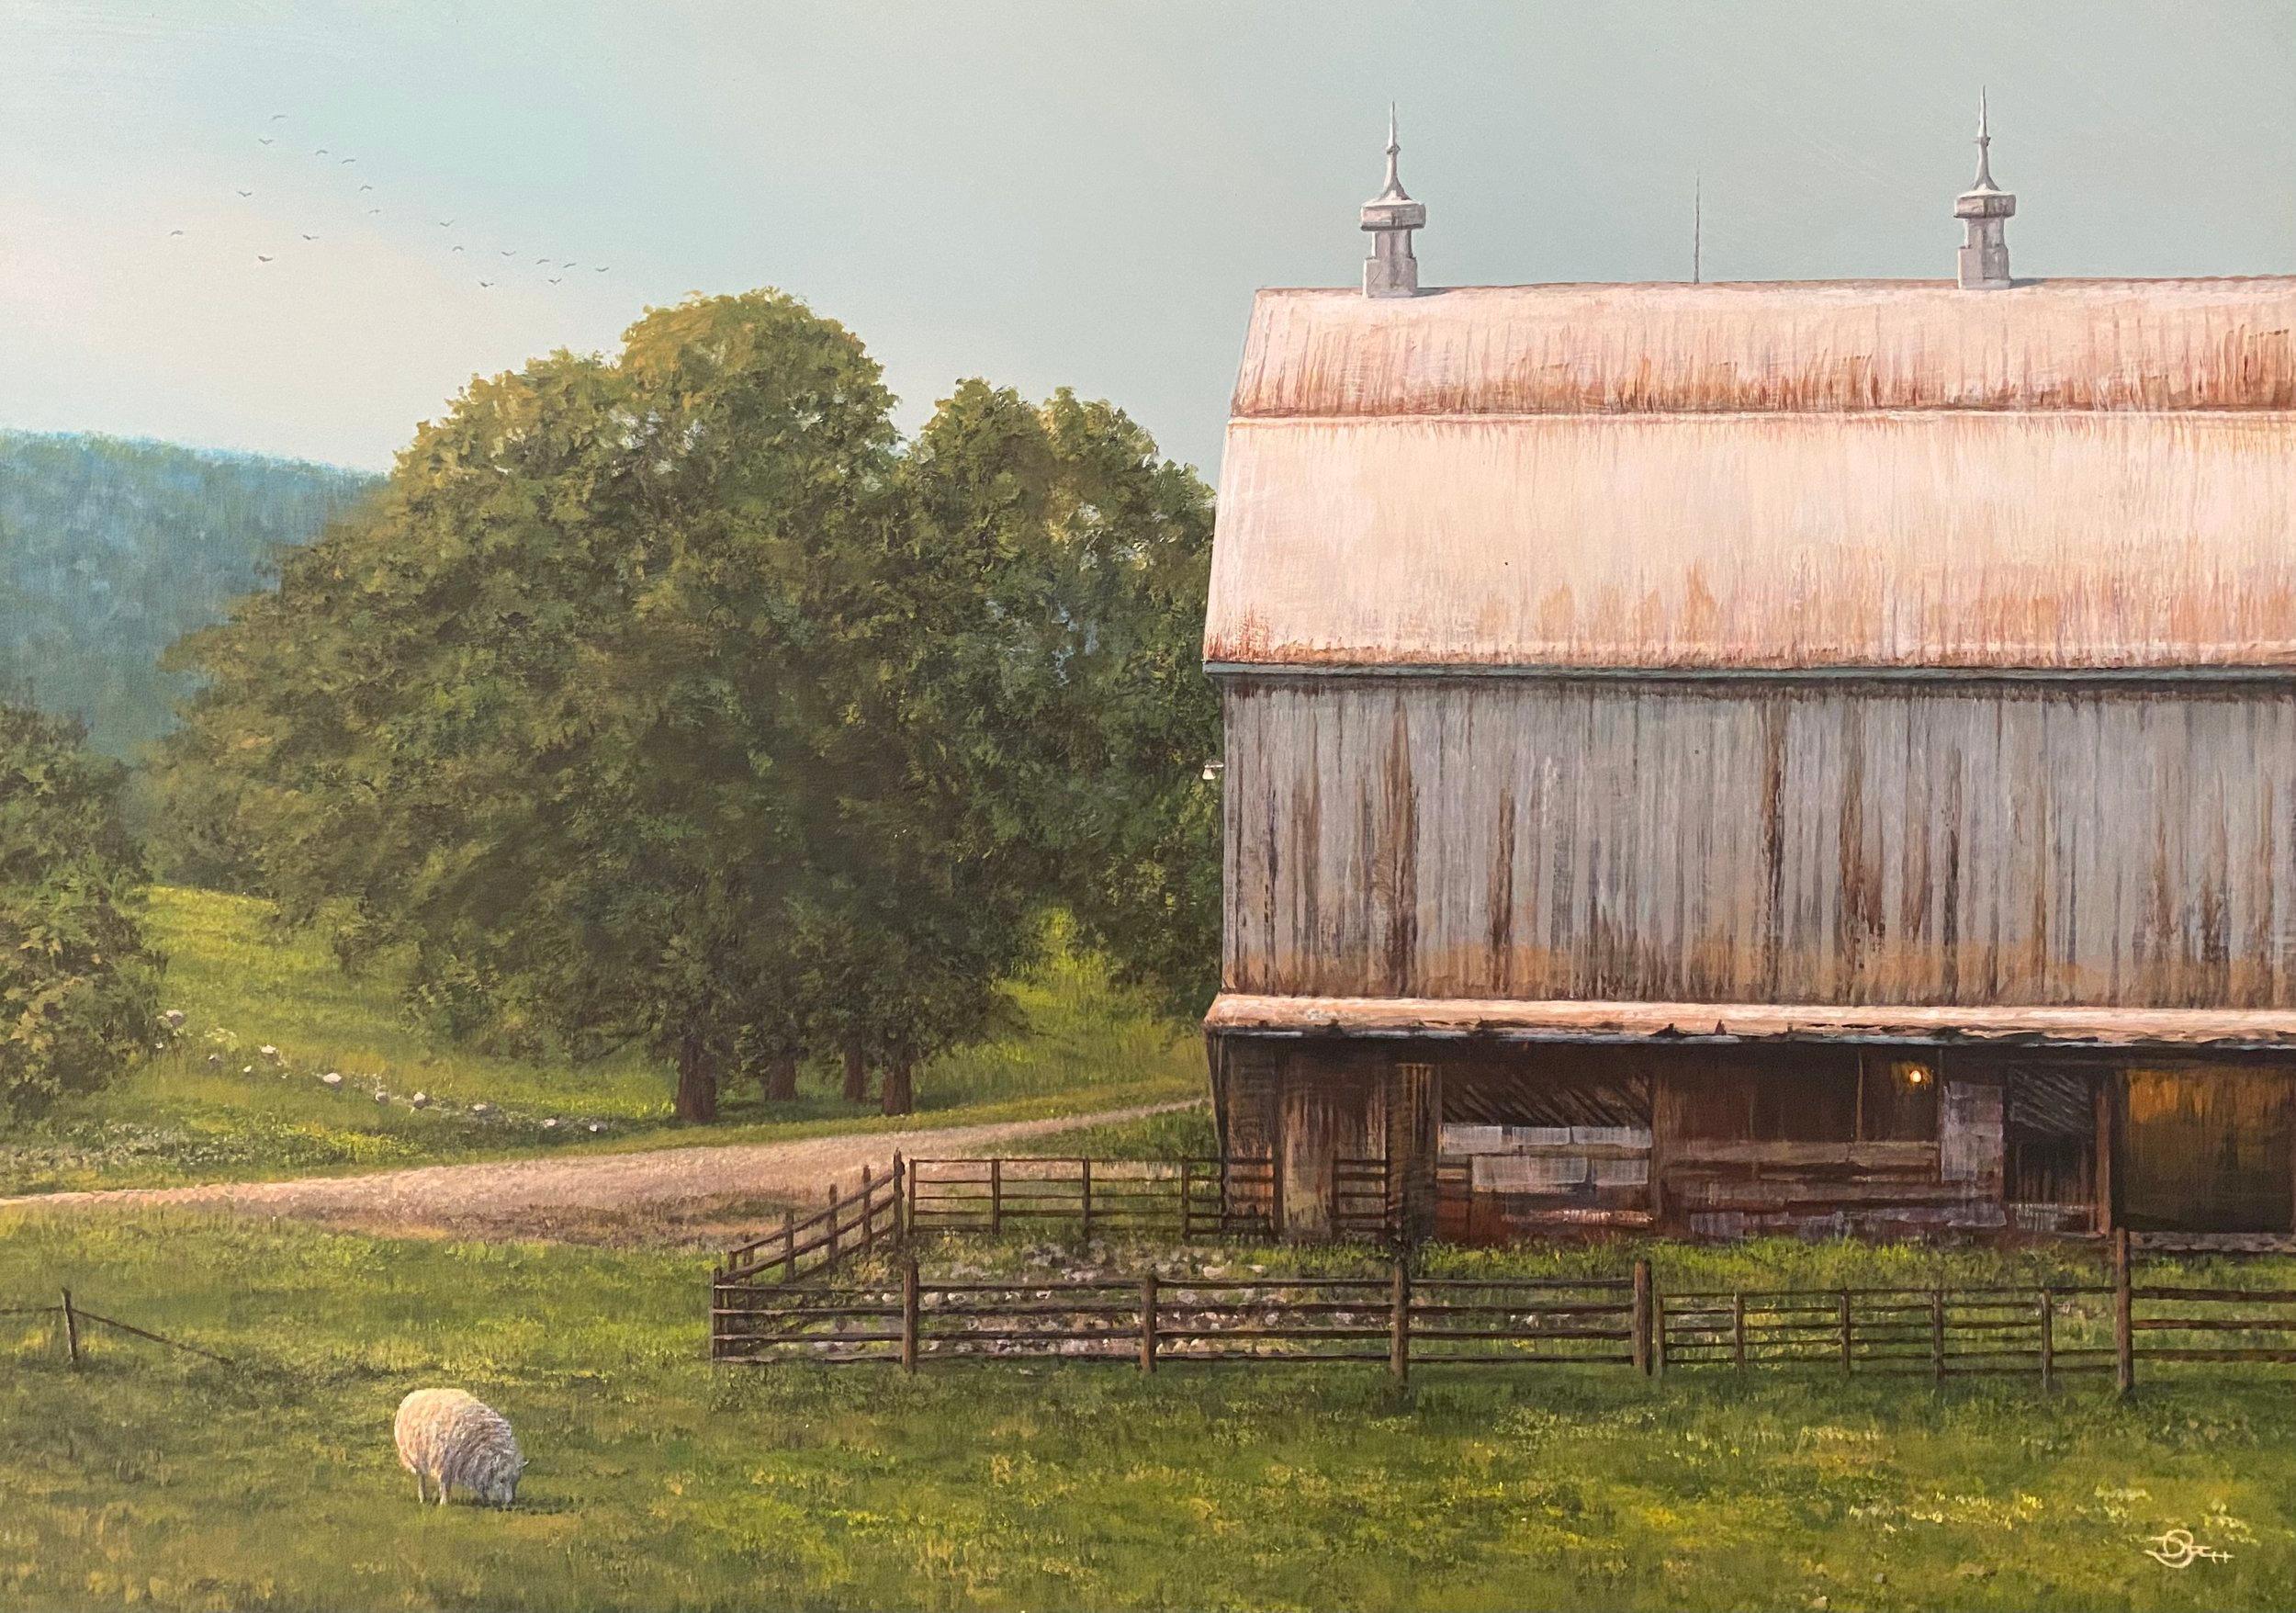 This piece, "Sunday Graze", is a 12x17 acrylic painting on board by artist Del Bourree Bach featuring a peaceful rural landscape. A large white gambrel roof barn juts out from the right, standing tall against a perfect summer sky. The composition